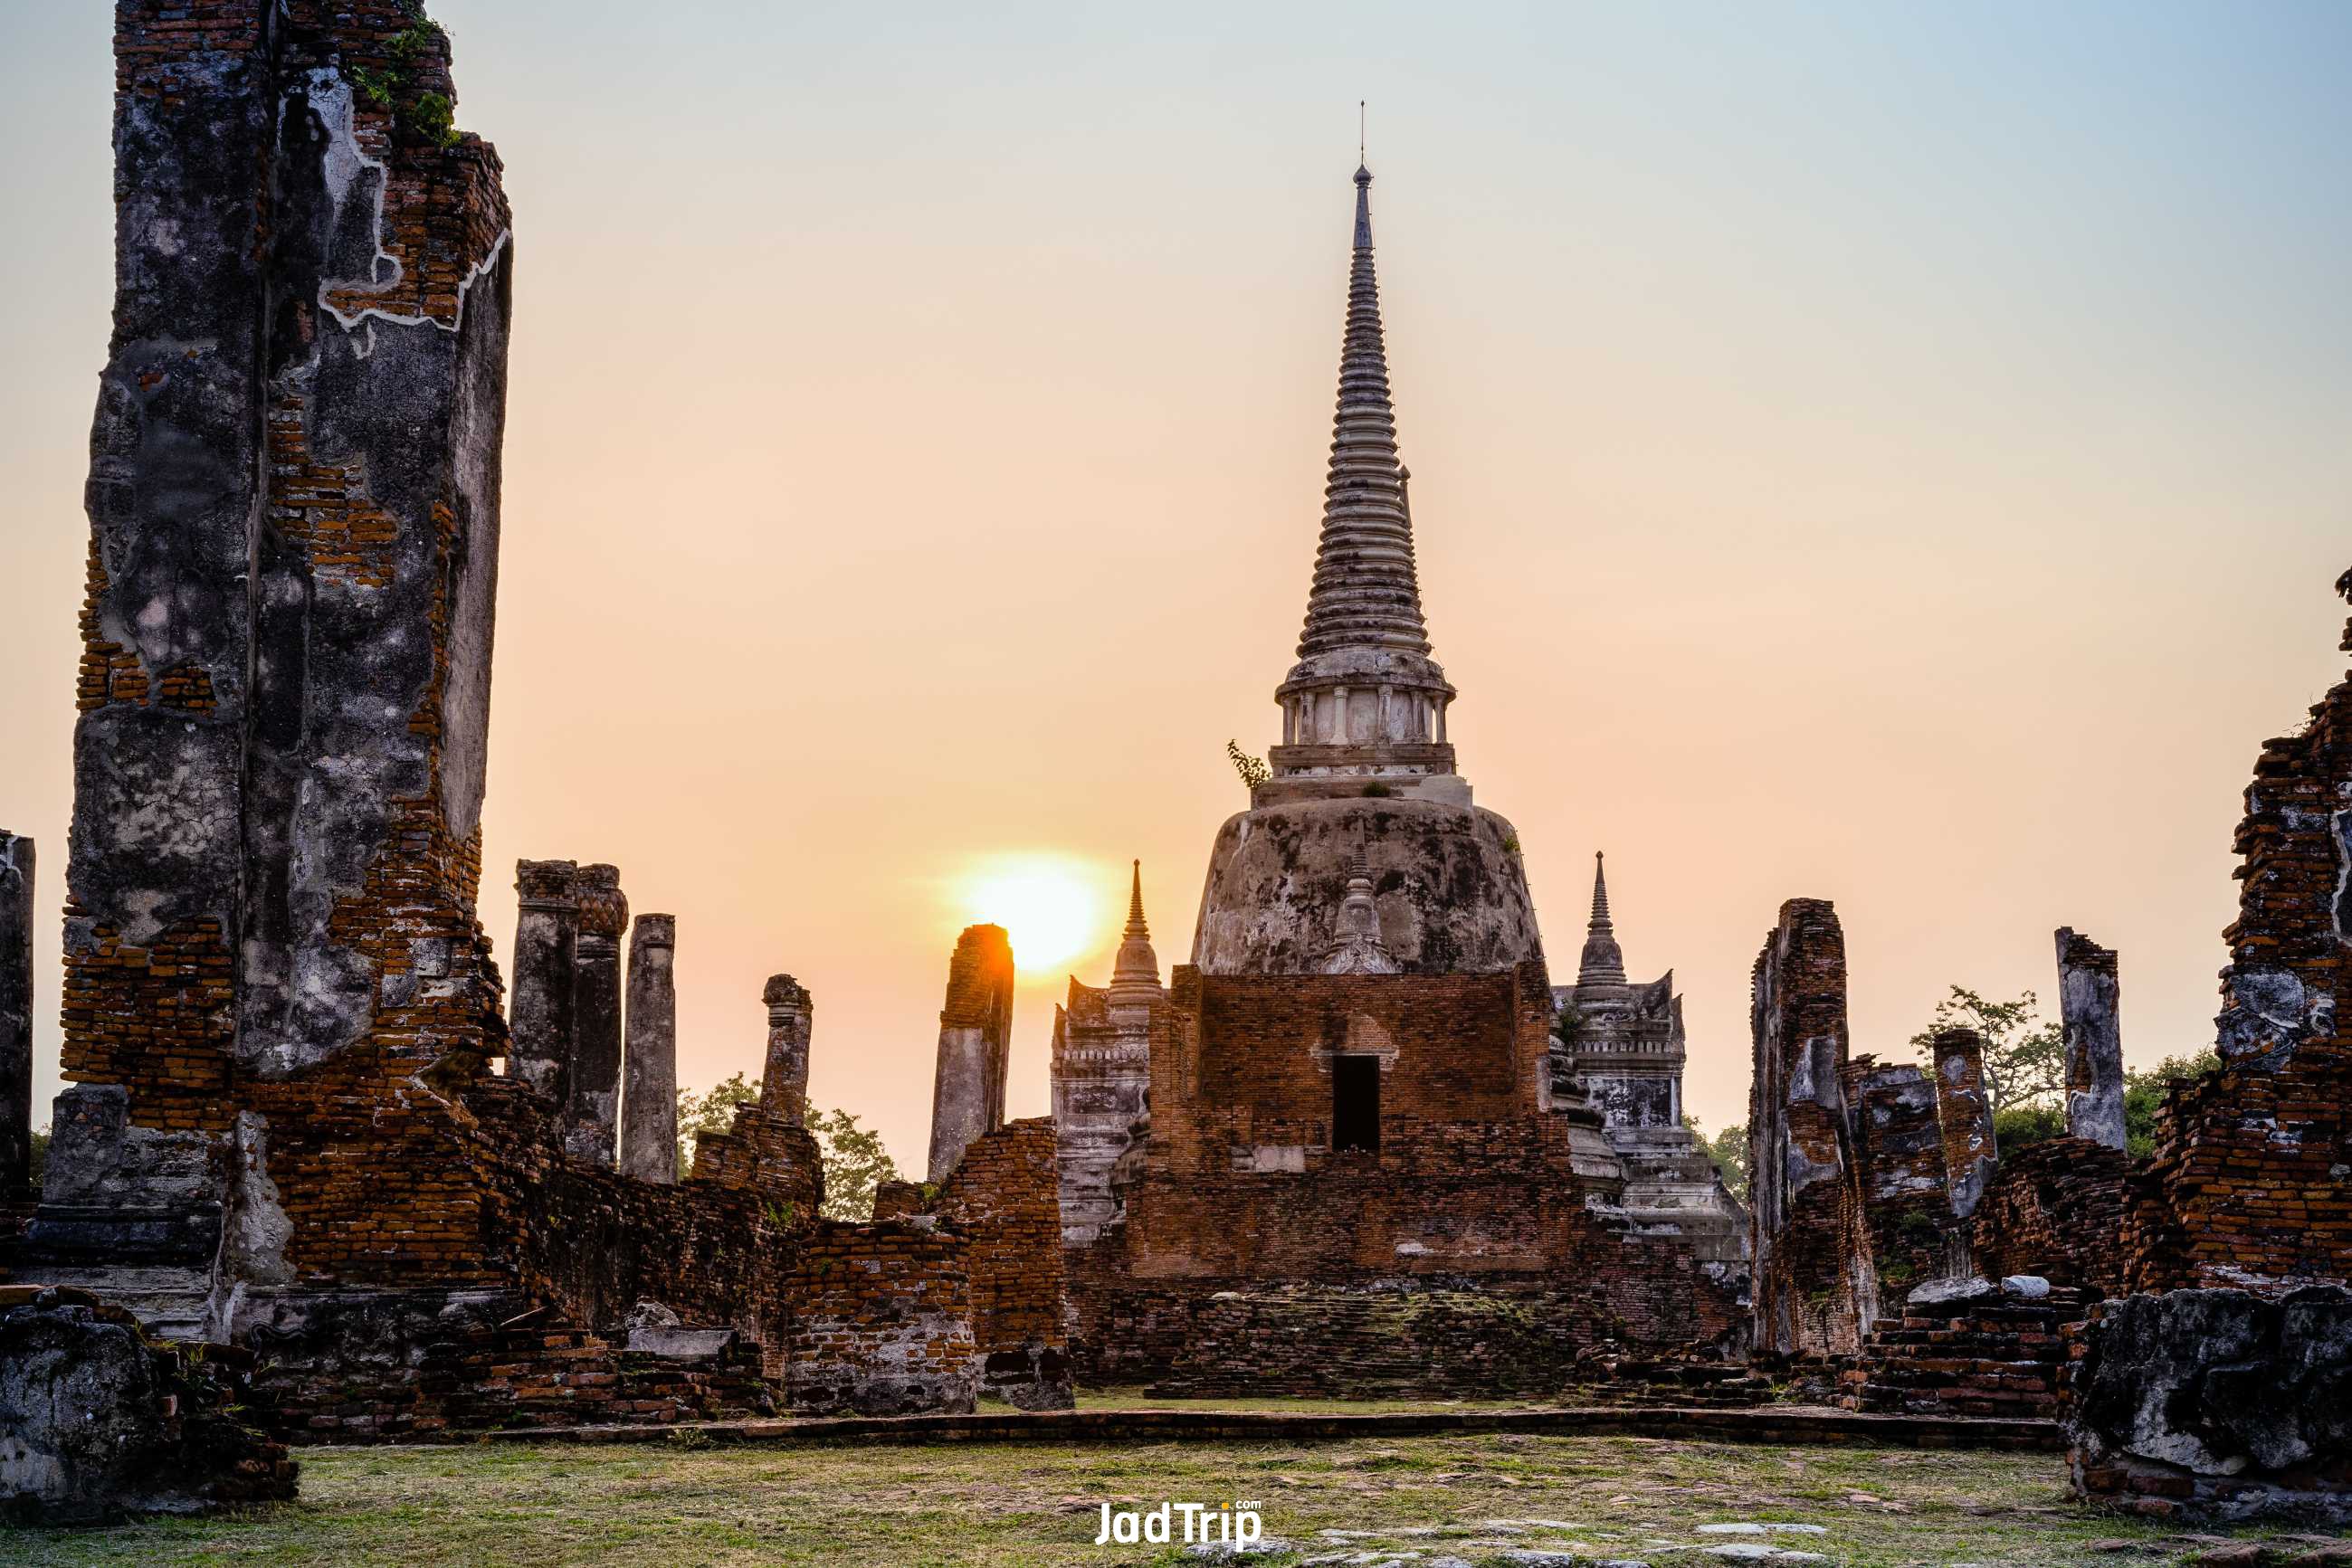 ruins-pagoda-ancient-architecture-wat-phra-si-sanphet-old-temple-famous-attracti.jpg